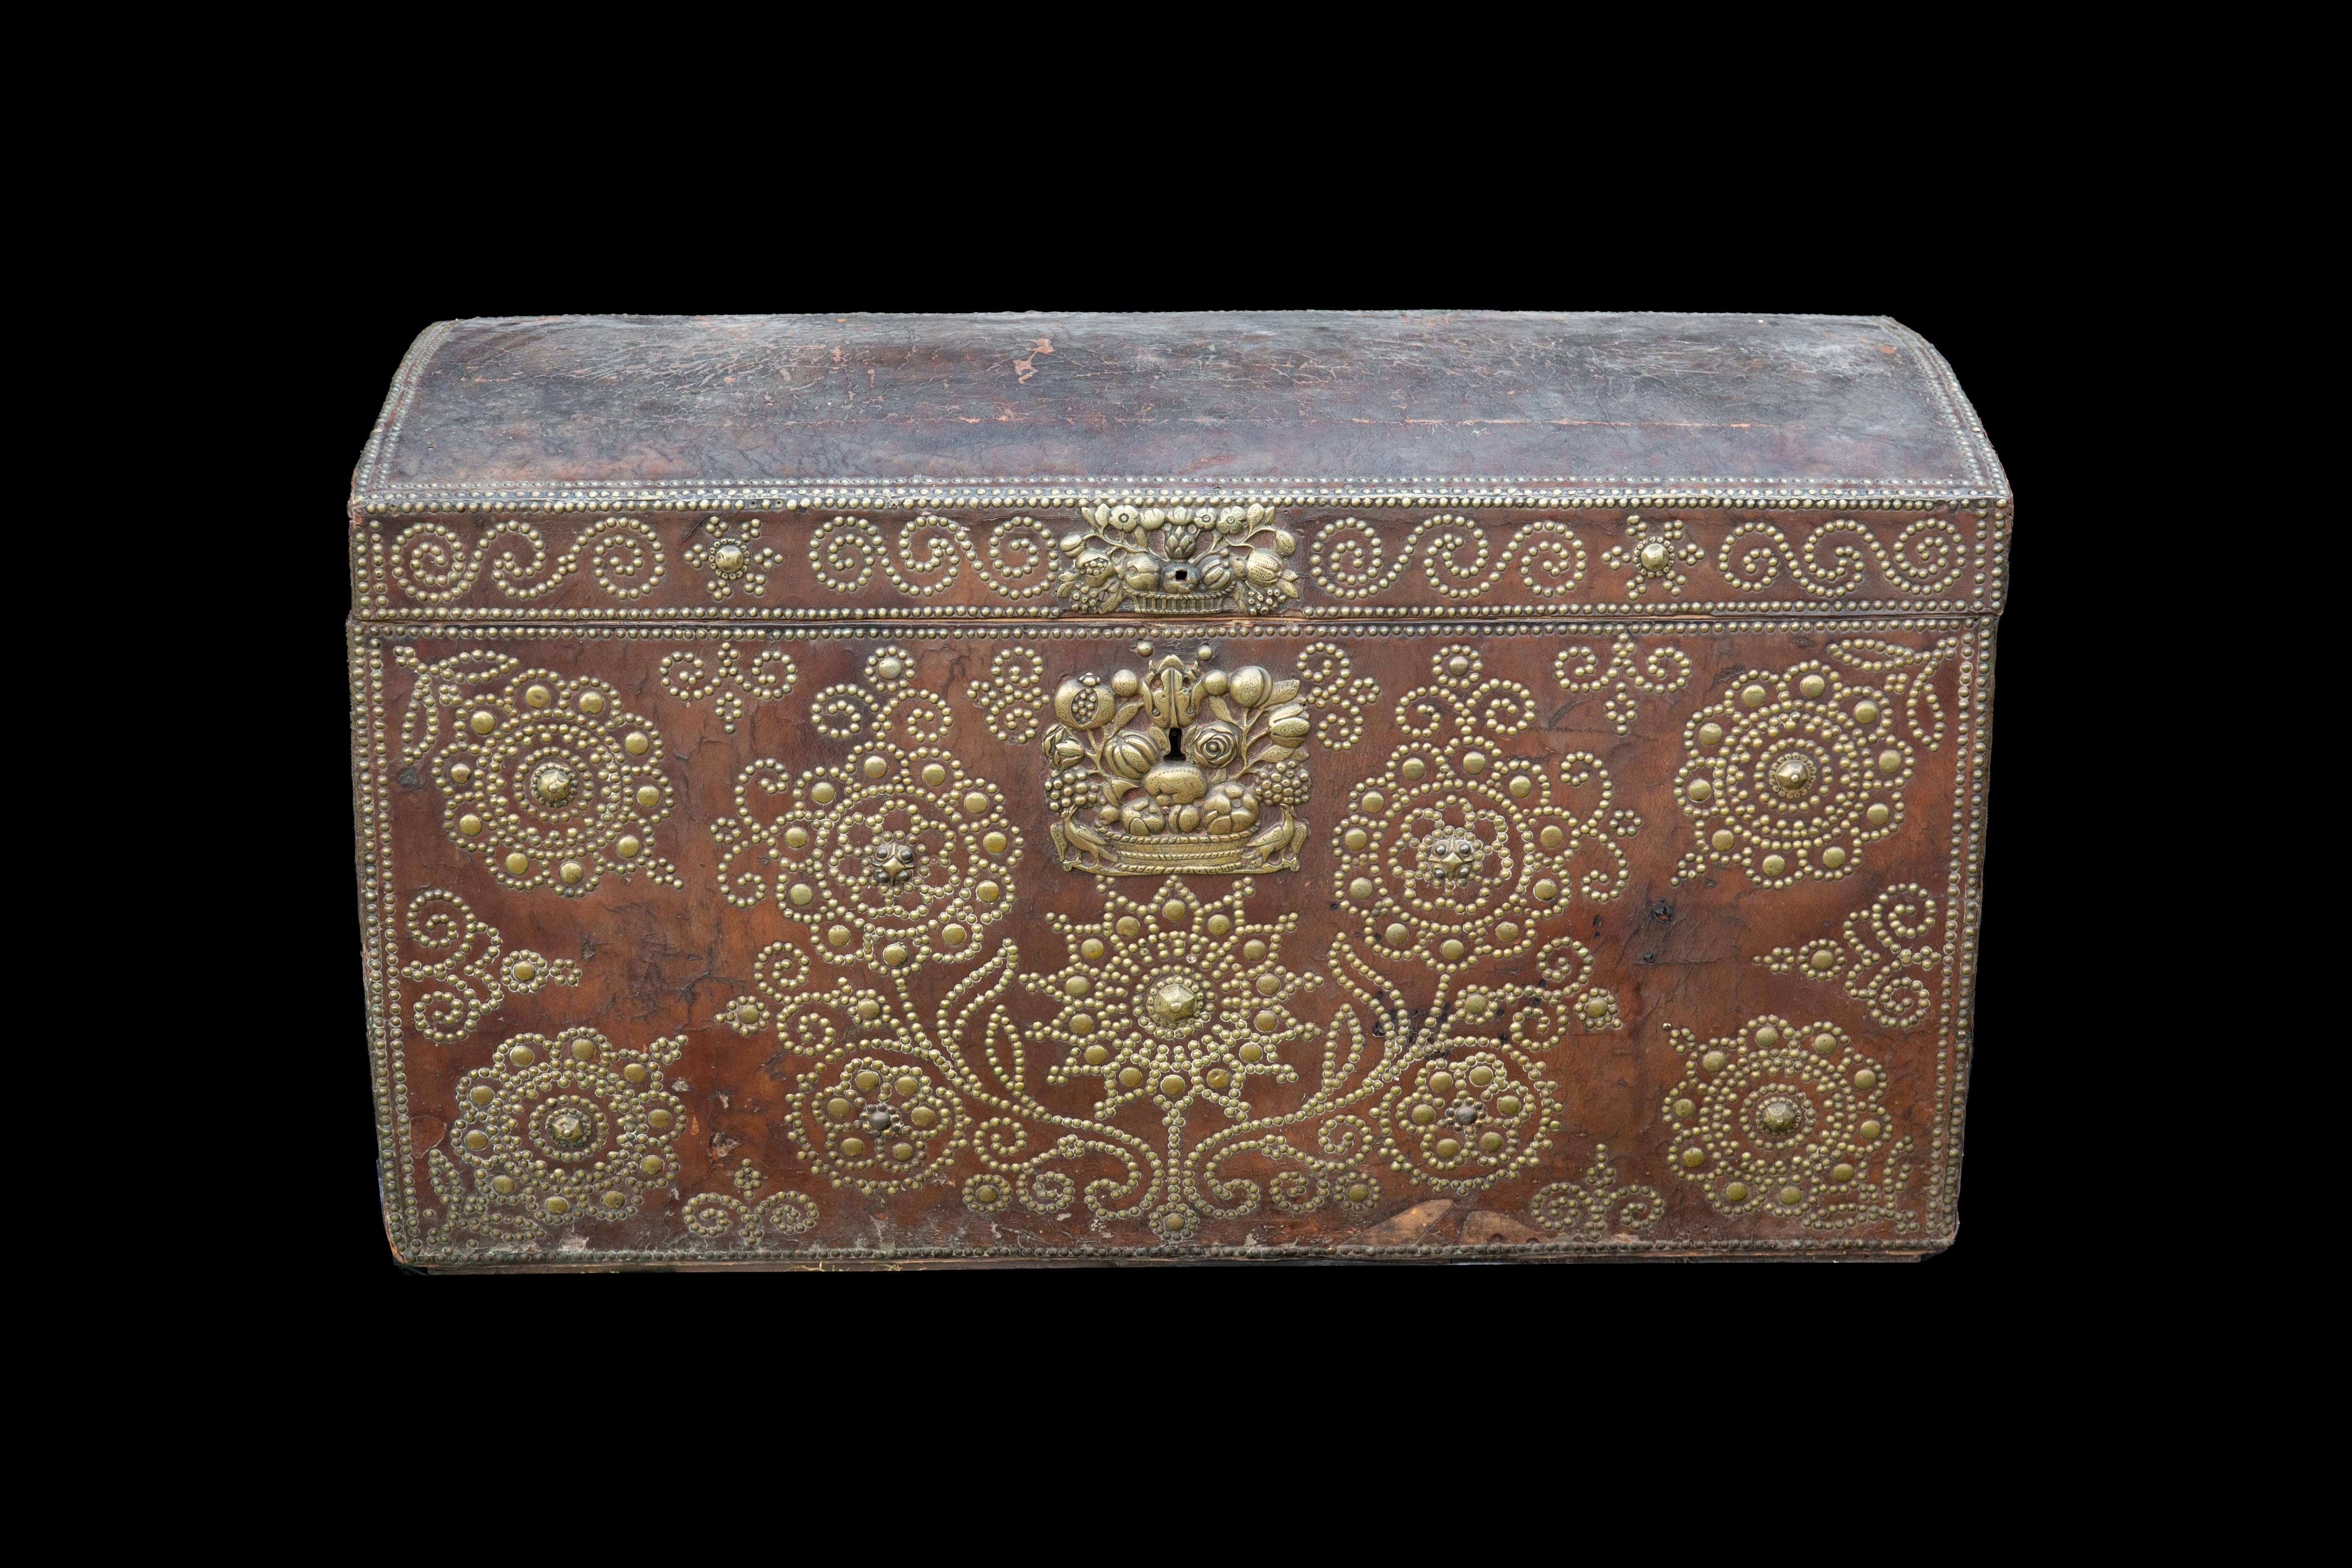 This exquisite French Tan leather travel trunk from the early 18th century presents a captivating blend of timeless elegance and meticulous craftsmanship. Adorned with brass studded decoration featuring enchanting stylized flowers, the trunk exudes